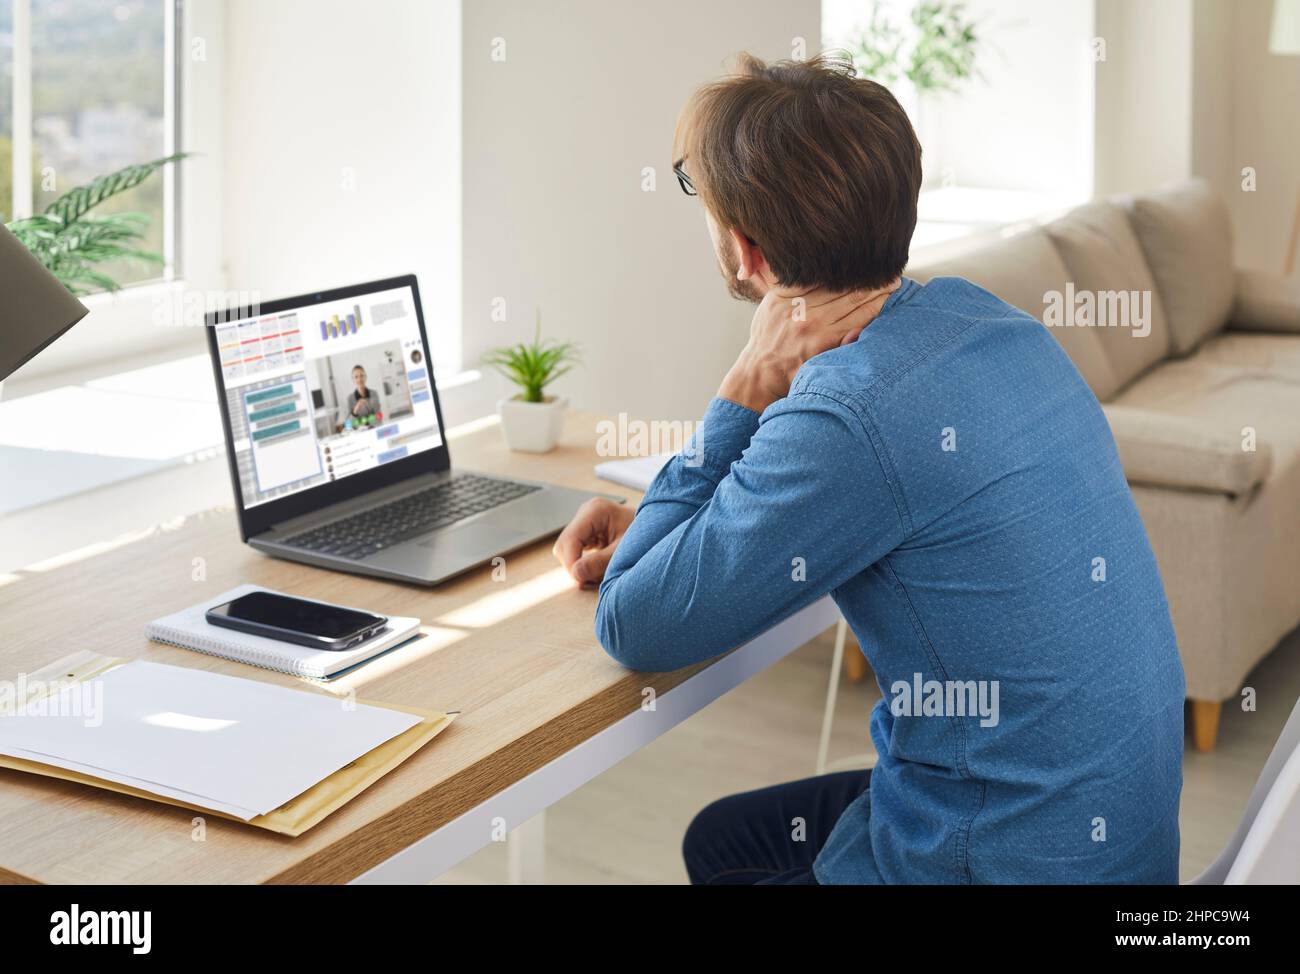 Man work on computer suffer from neck pain Stock Photo